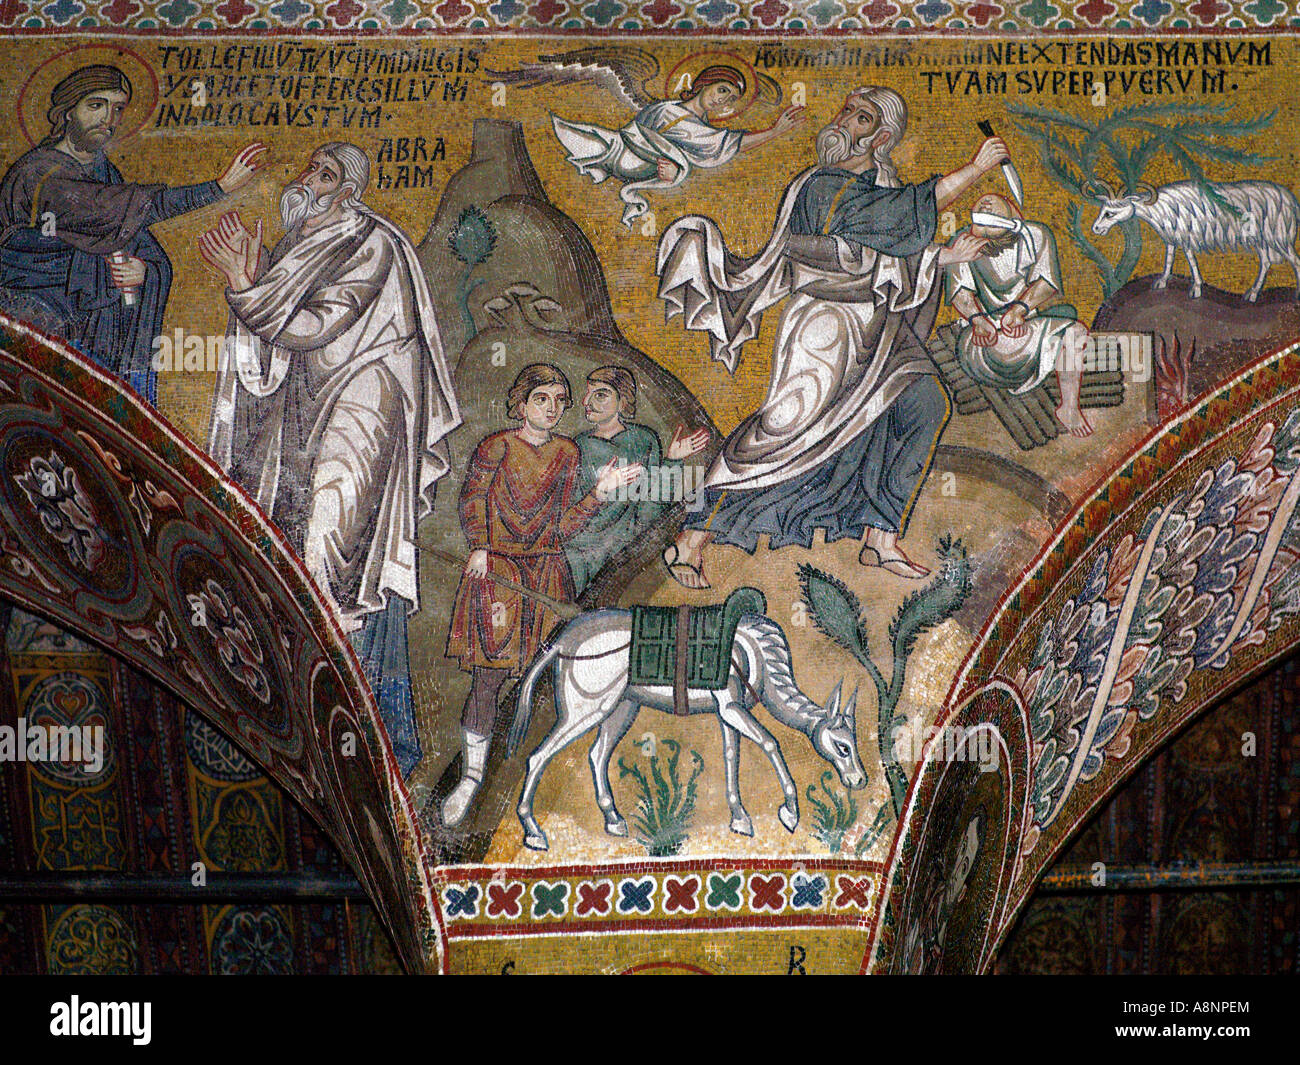 Palermo Sicily Italy The Palatine Chapel in the Norman Palace Mosaic in the Aisles The Sacrifice of Isaac Stock Photo